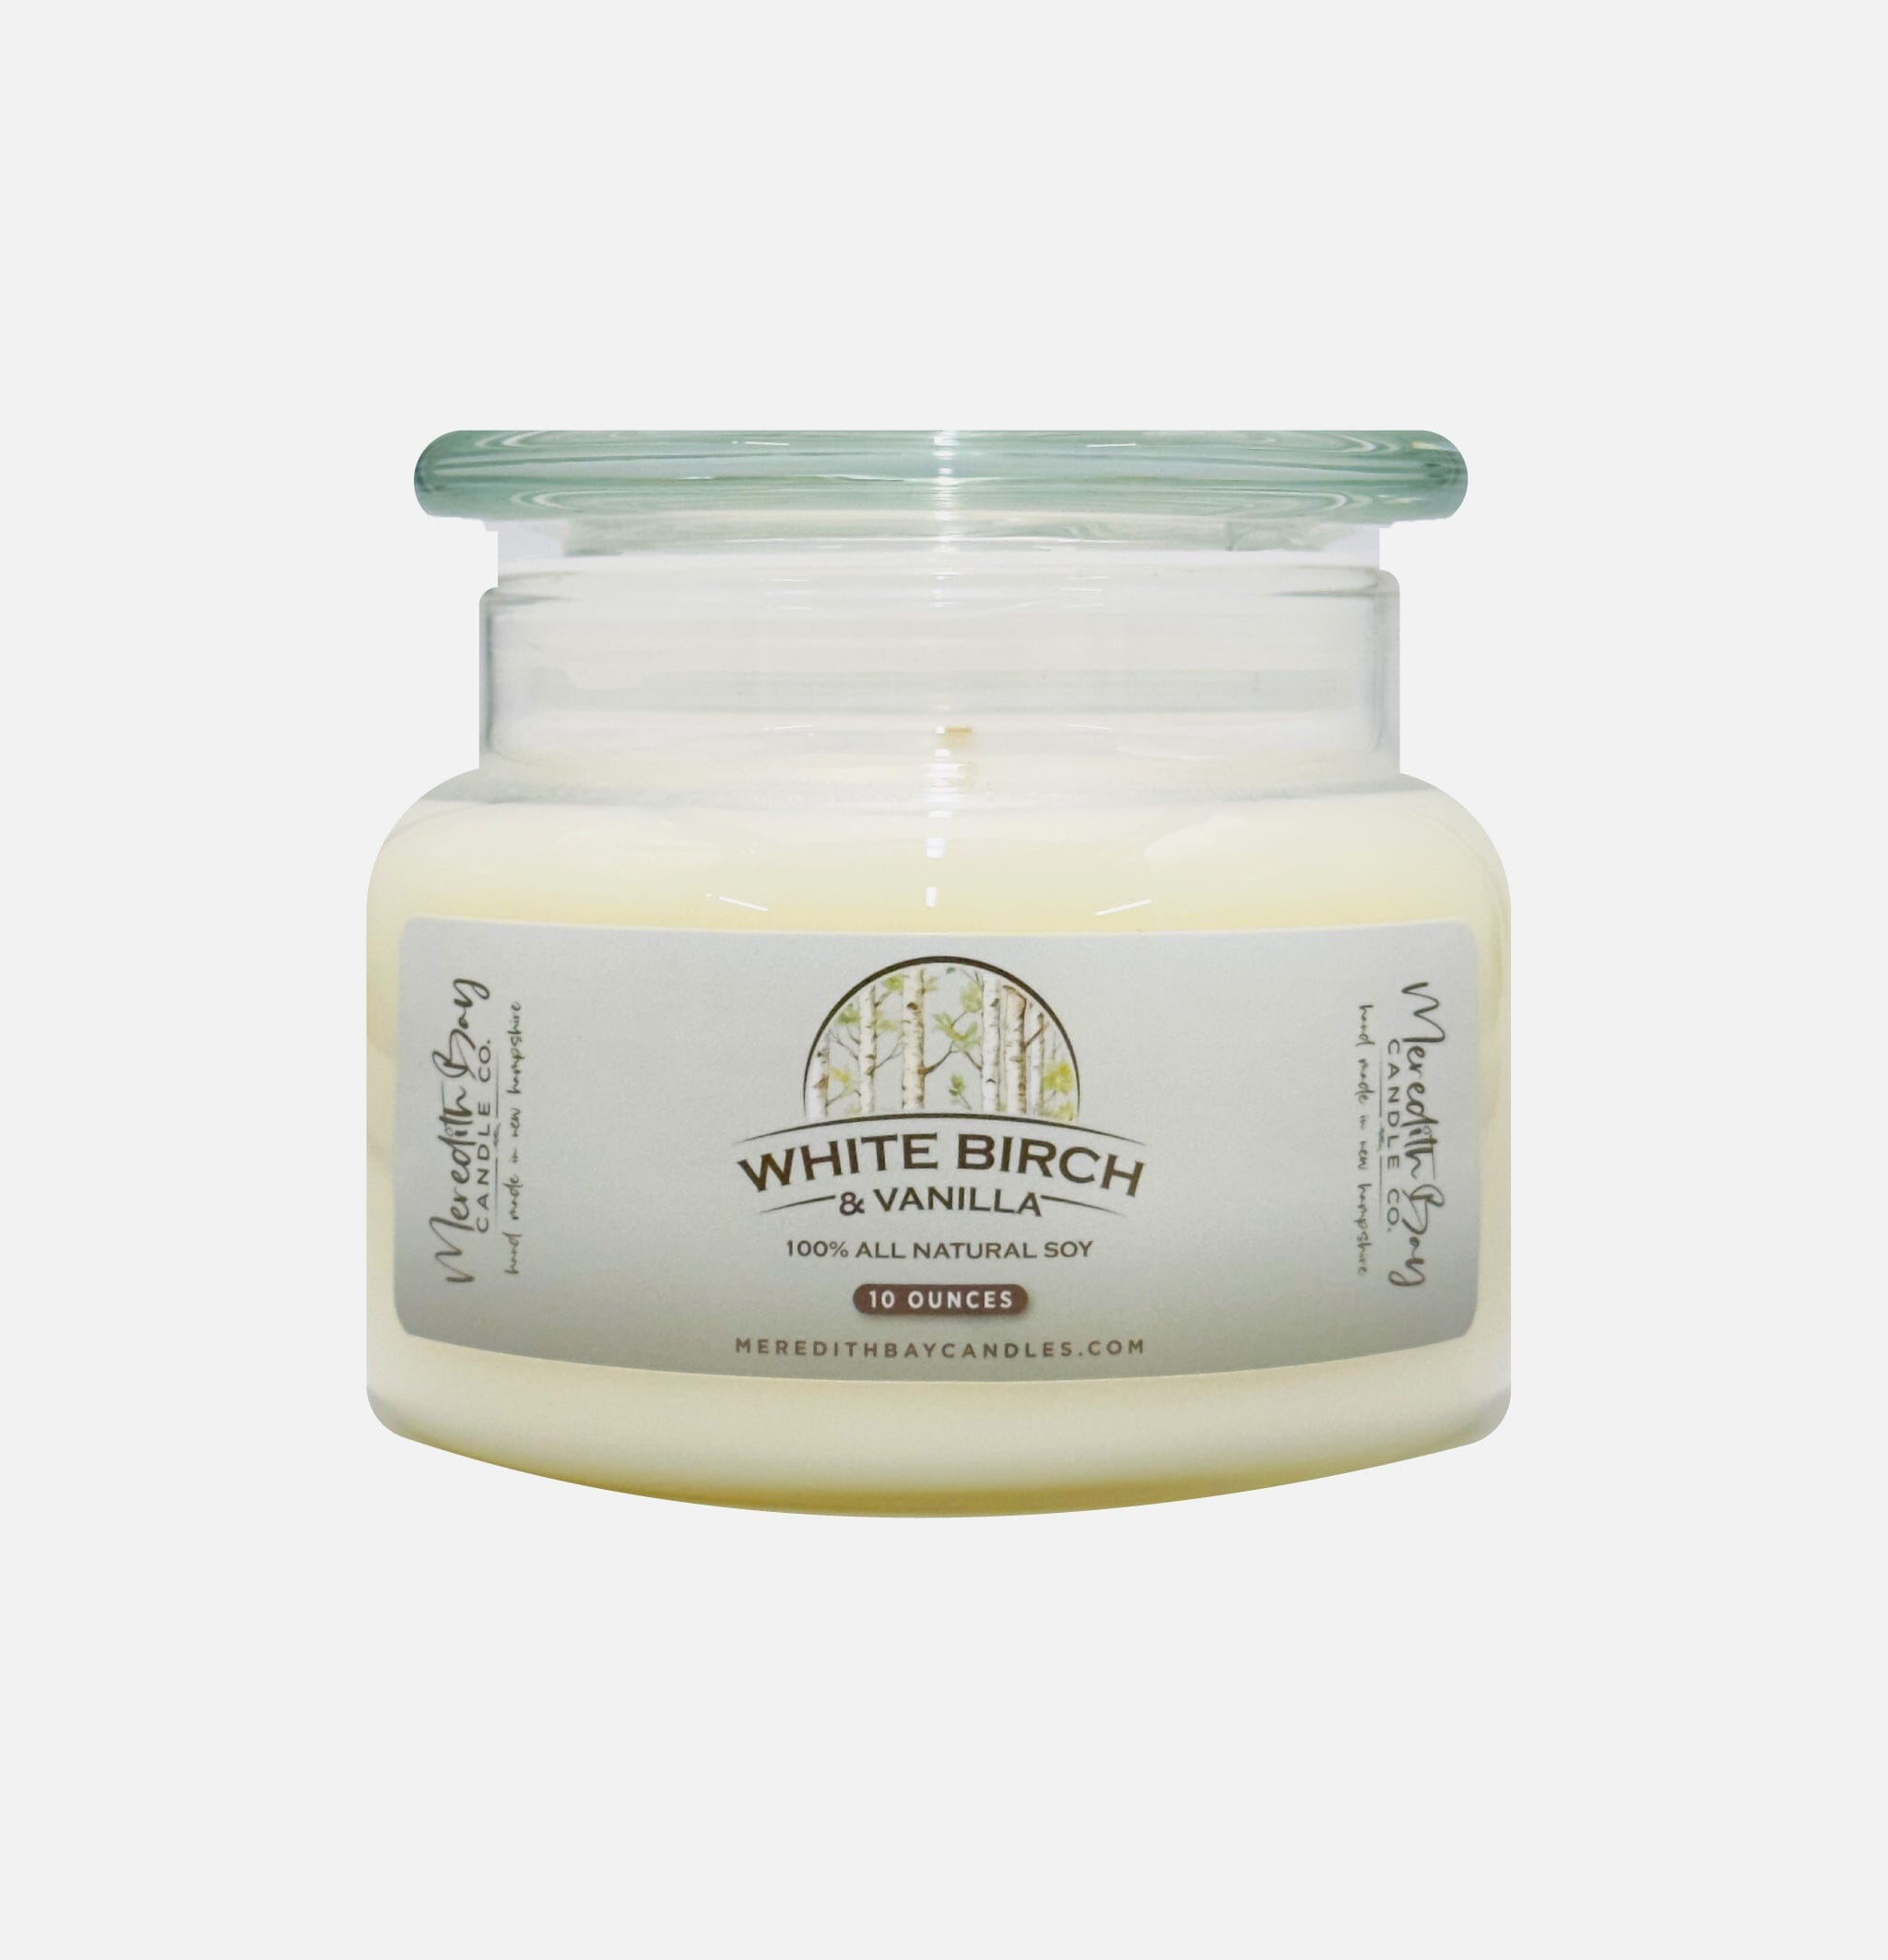 White Birch & Vanilla Soy Candle Meredith Bay Candle Co 10 Oz 